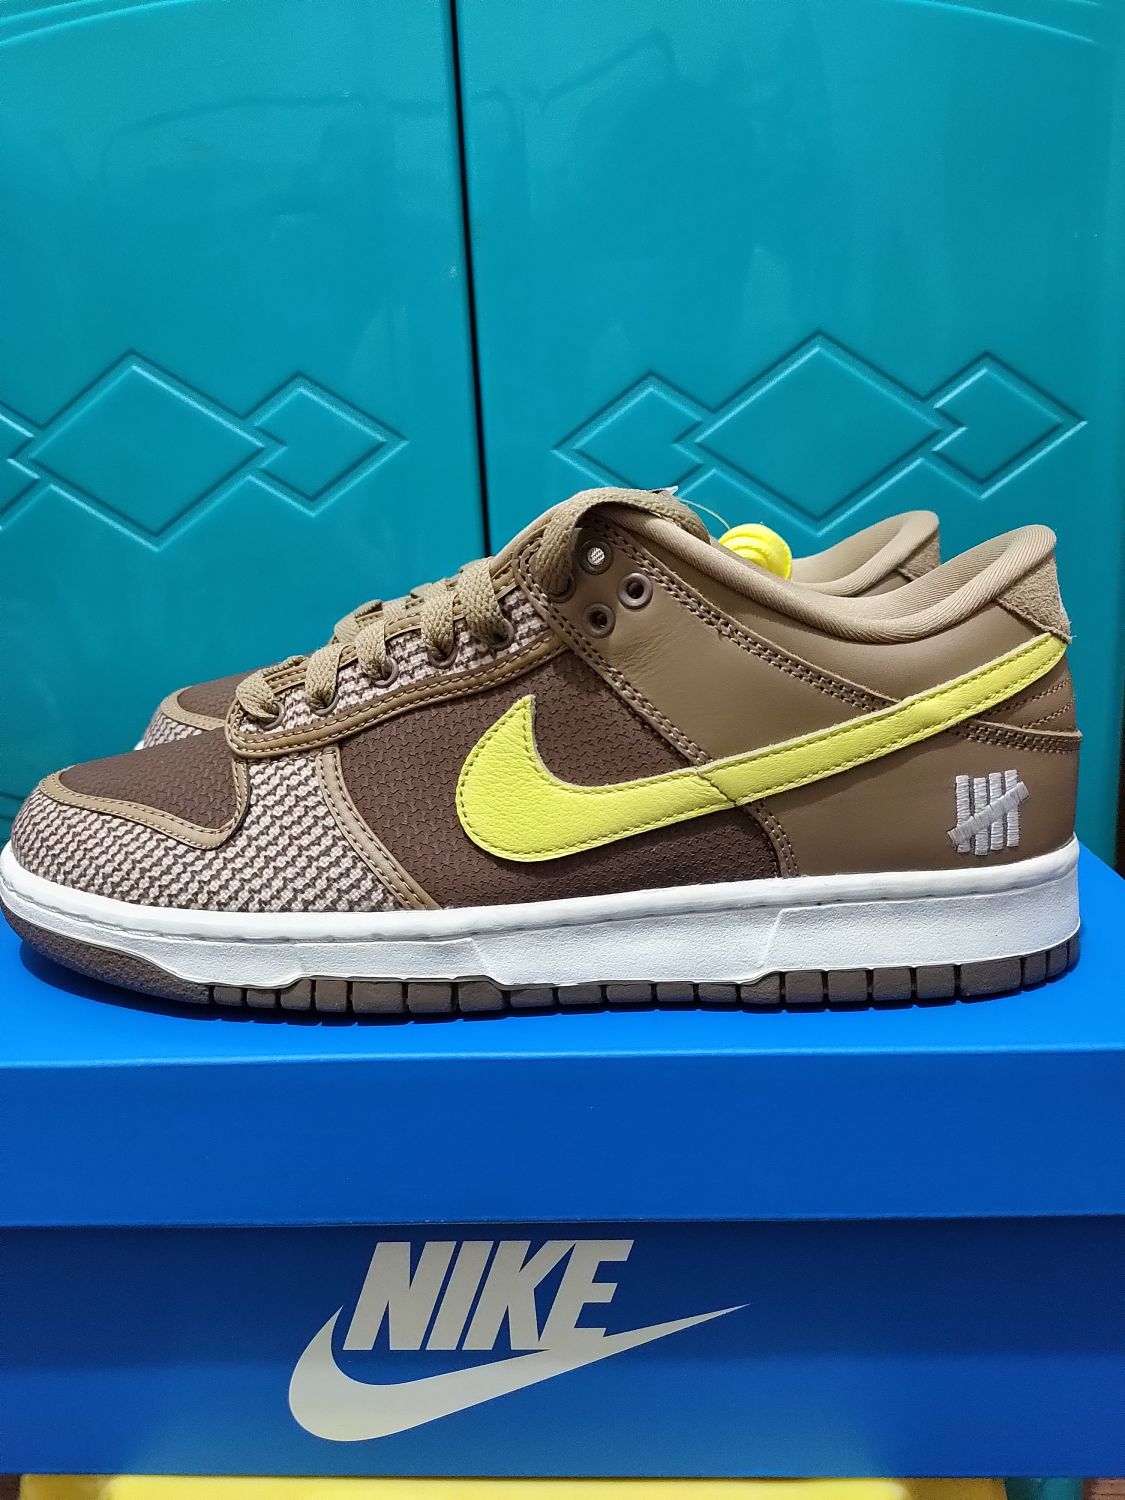 Nike Dunk Low SP UNDEFEATED Canteen Dunk Vs. AF1 Pack | AfterMarket